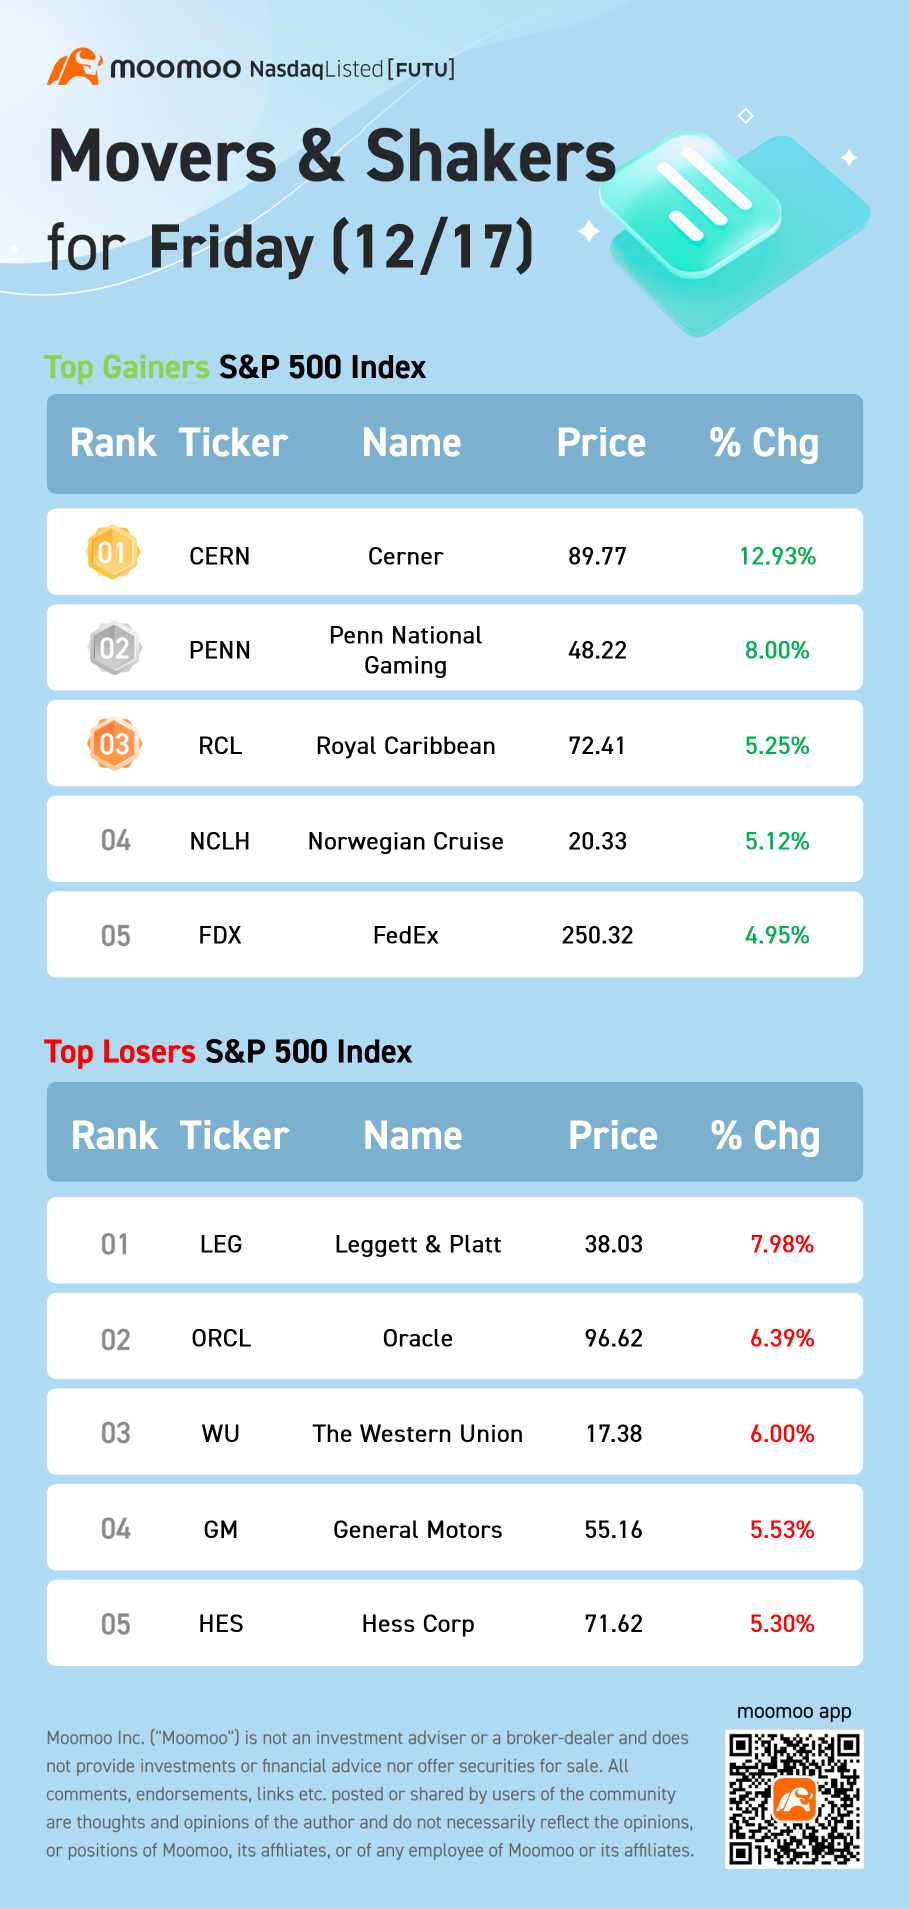 S&P 500 Movers for Friday (12/17)